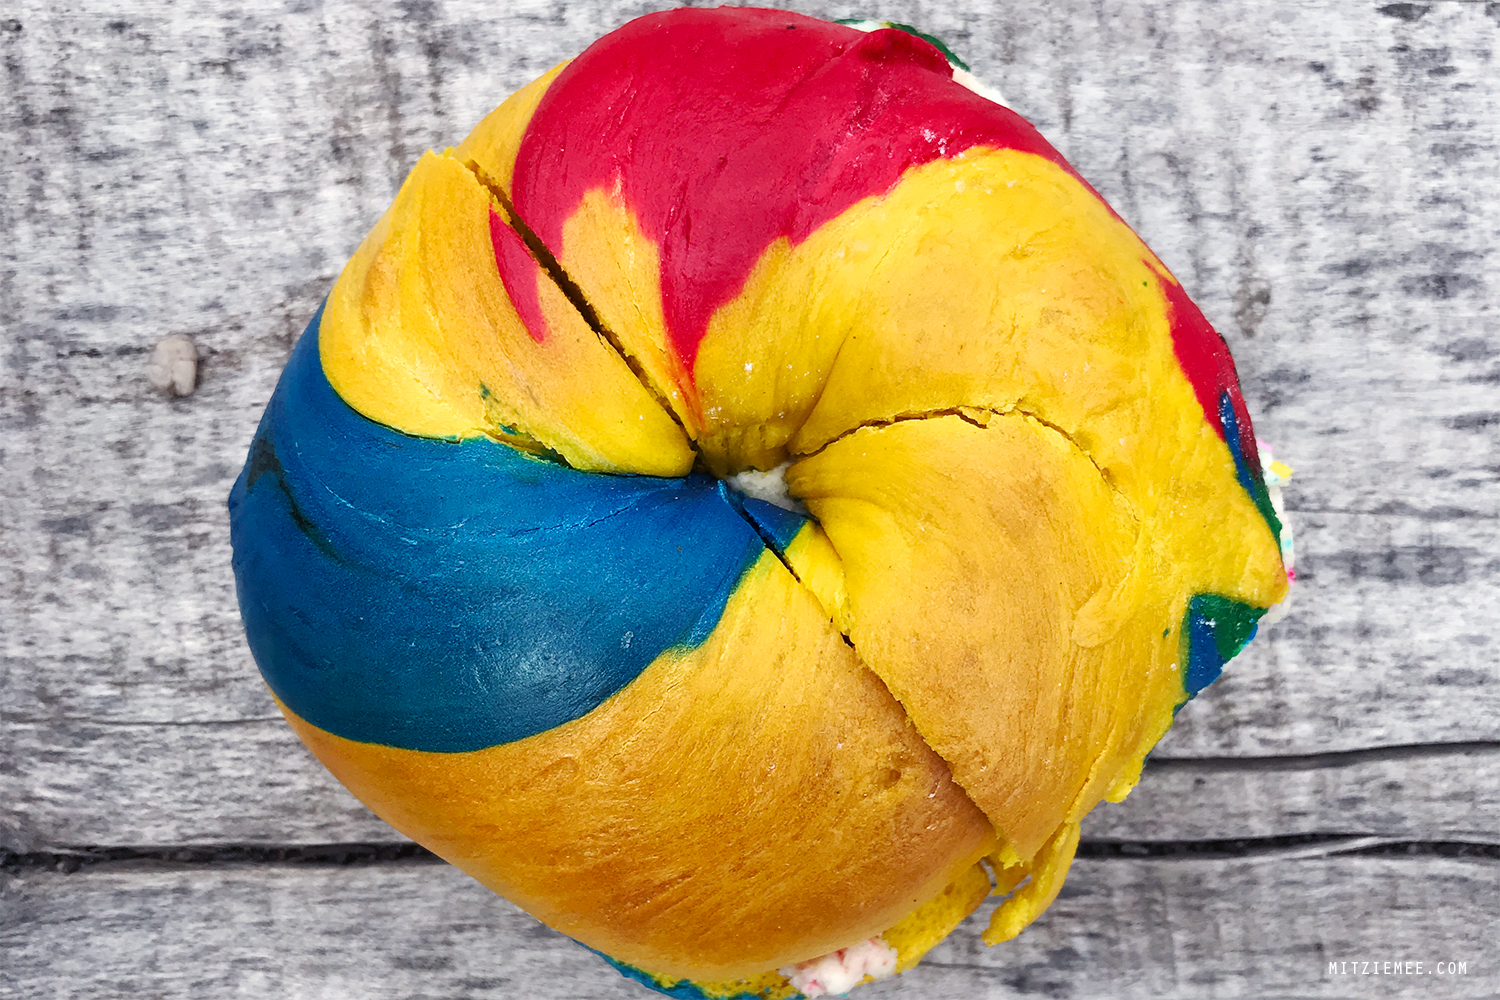 Rainbow bagel at The Bagel Store